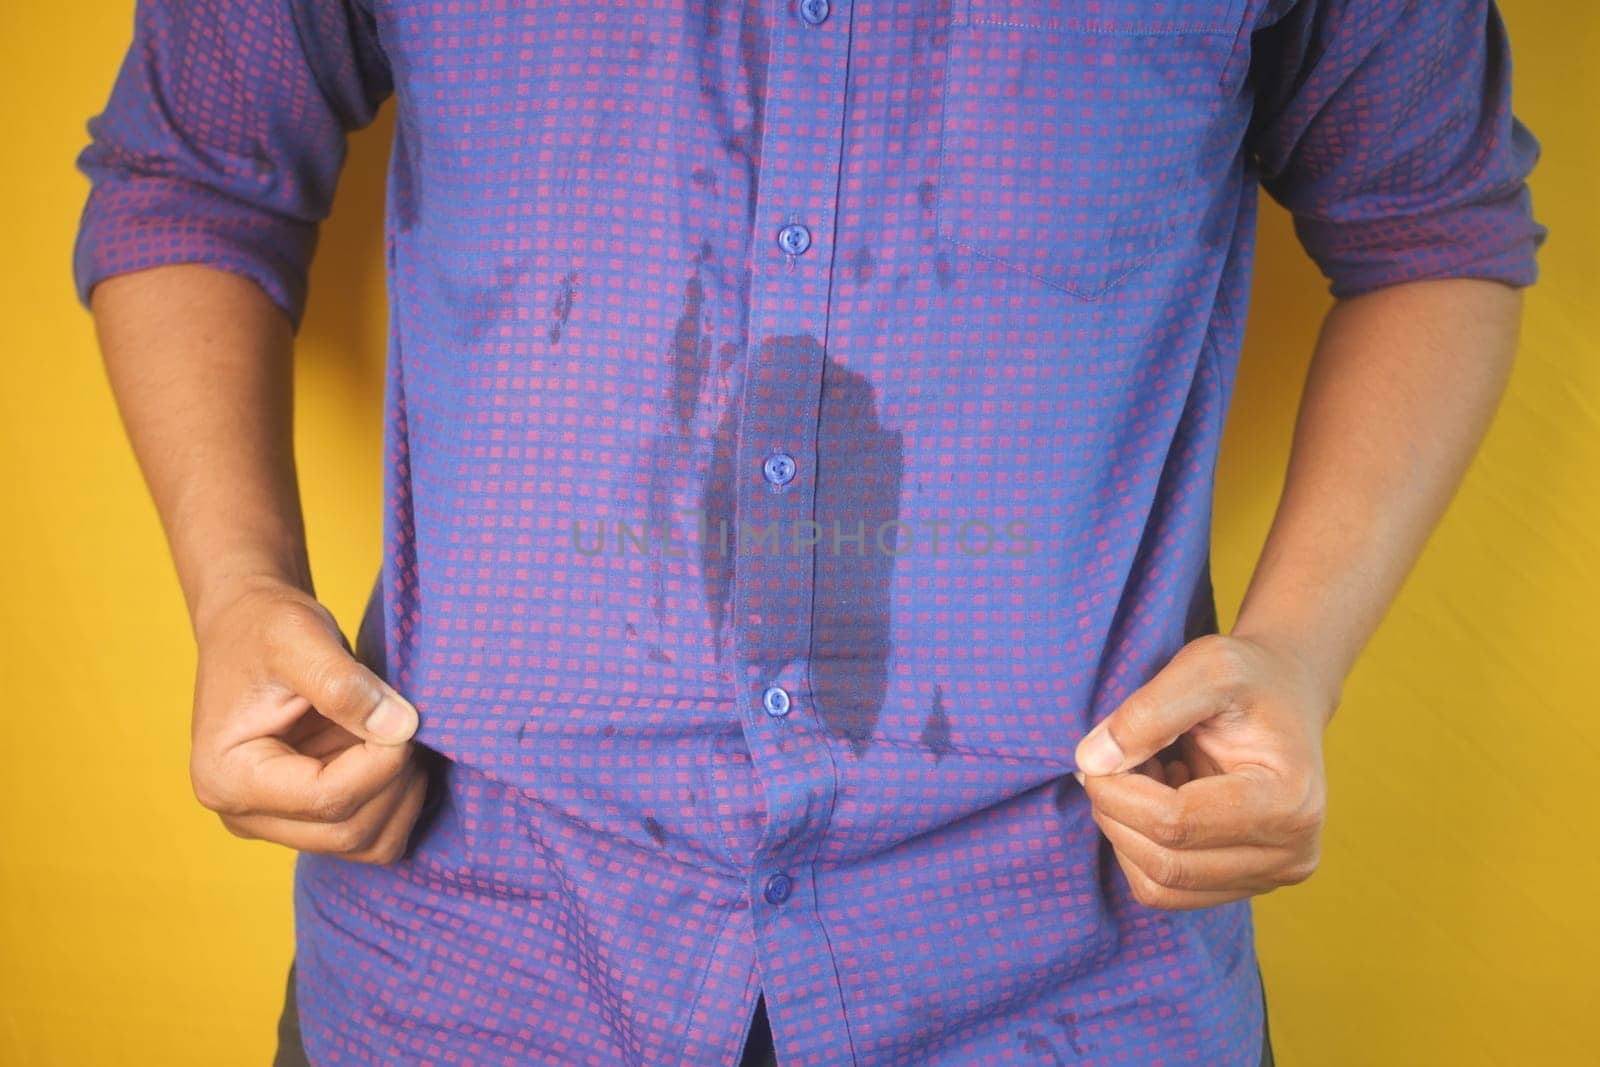 men hands with spilled water over his shirt.